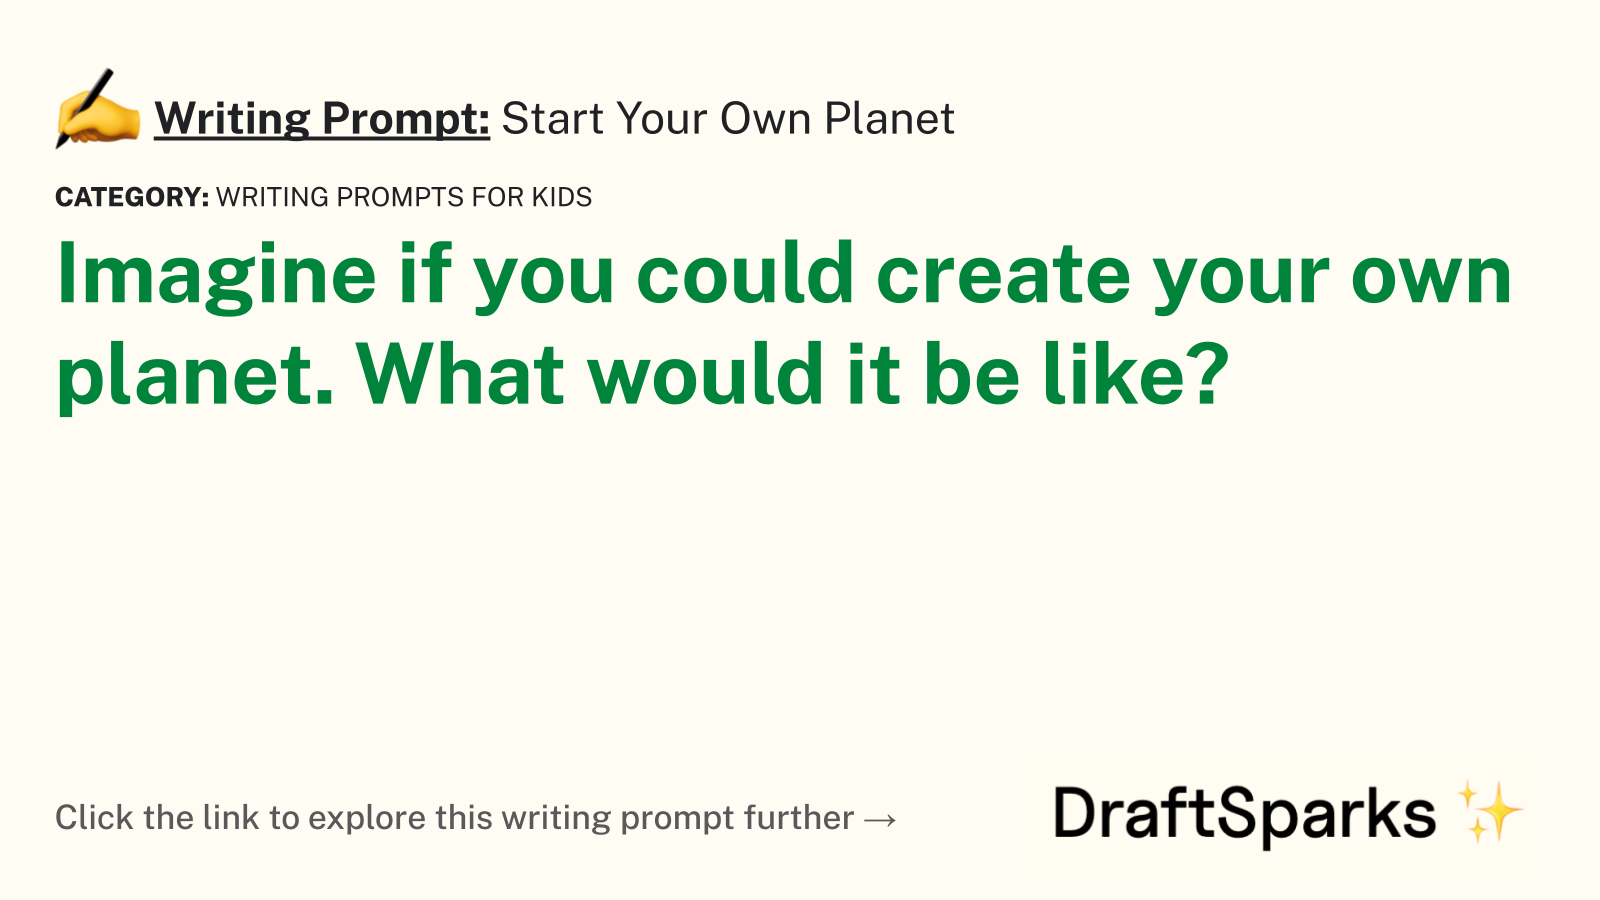 Start Your Own Planet